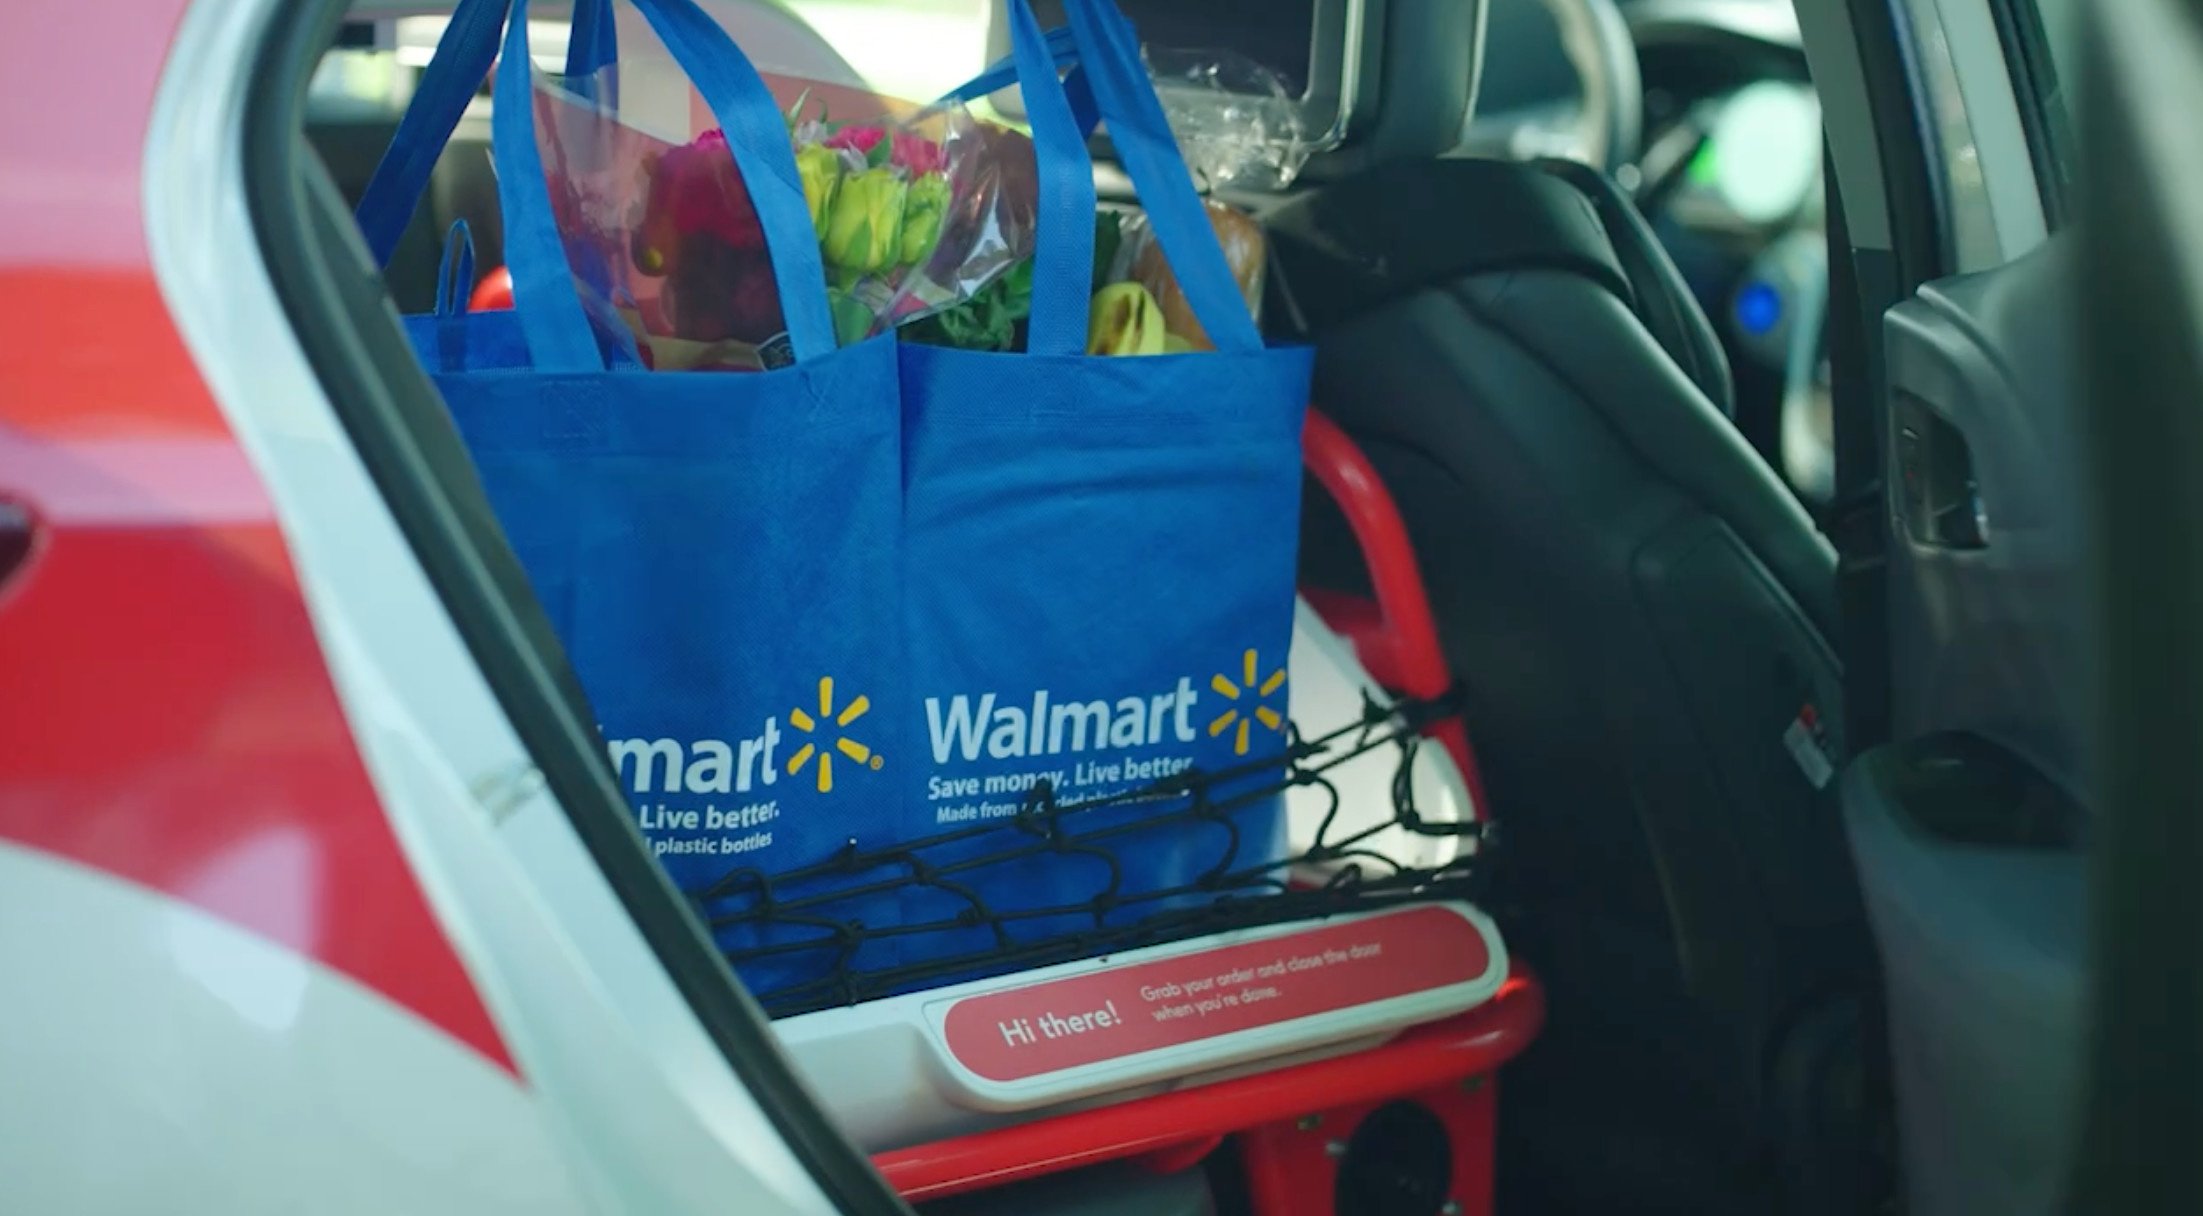 Walmart delivery bags in back of Cruise driverless car